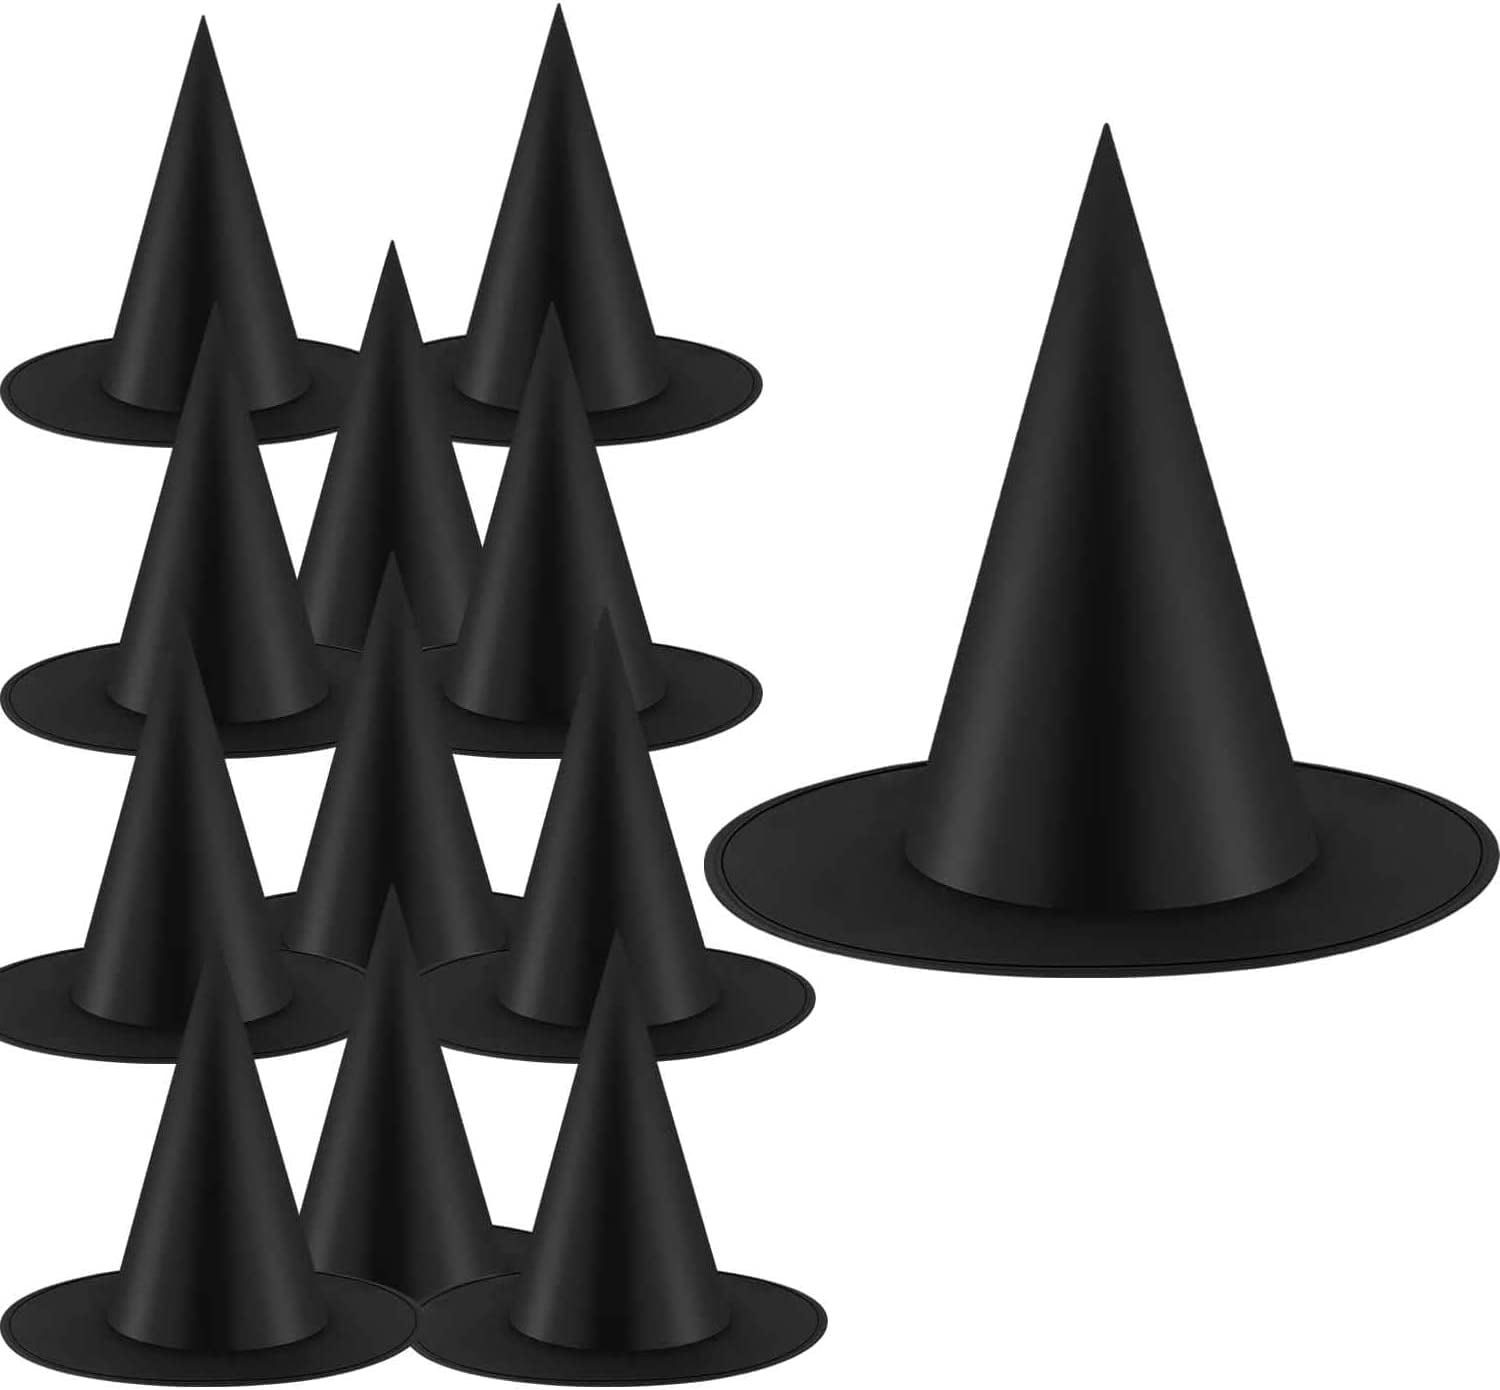 12 Pcs Halloween Black Witch Hat Halloween Costume Accessory Halloween Cosplay Favors with Hanging Rope for Halloween Party Decorations 